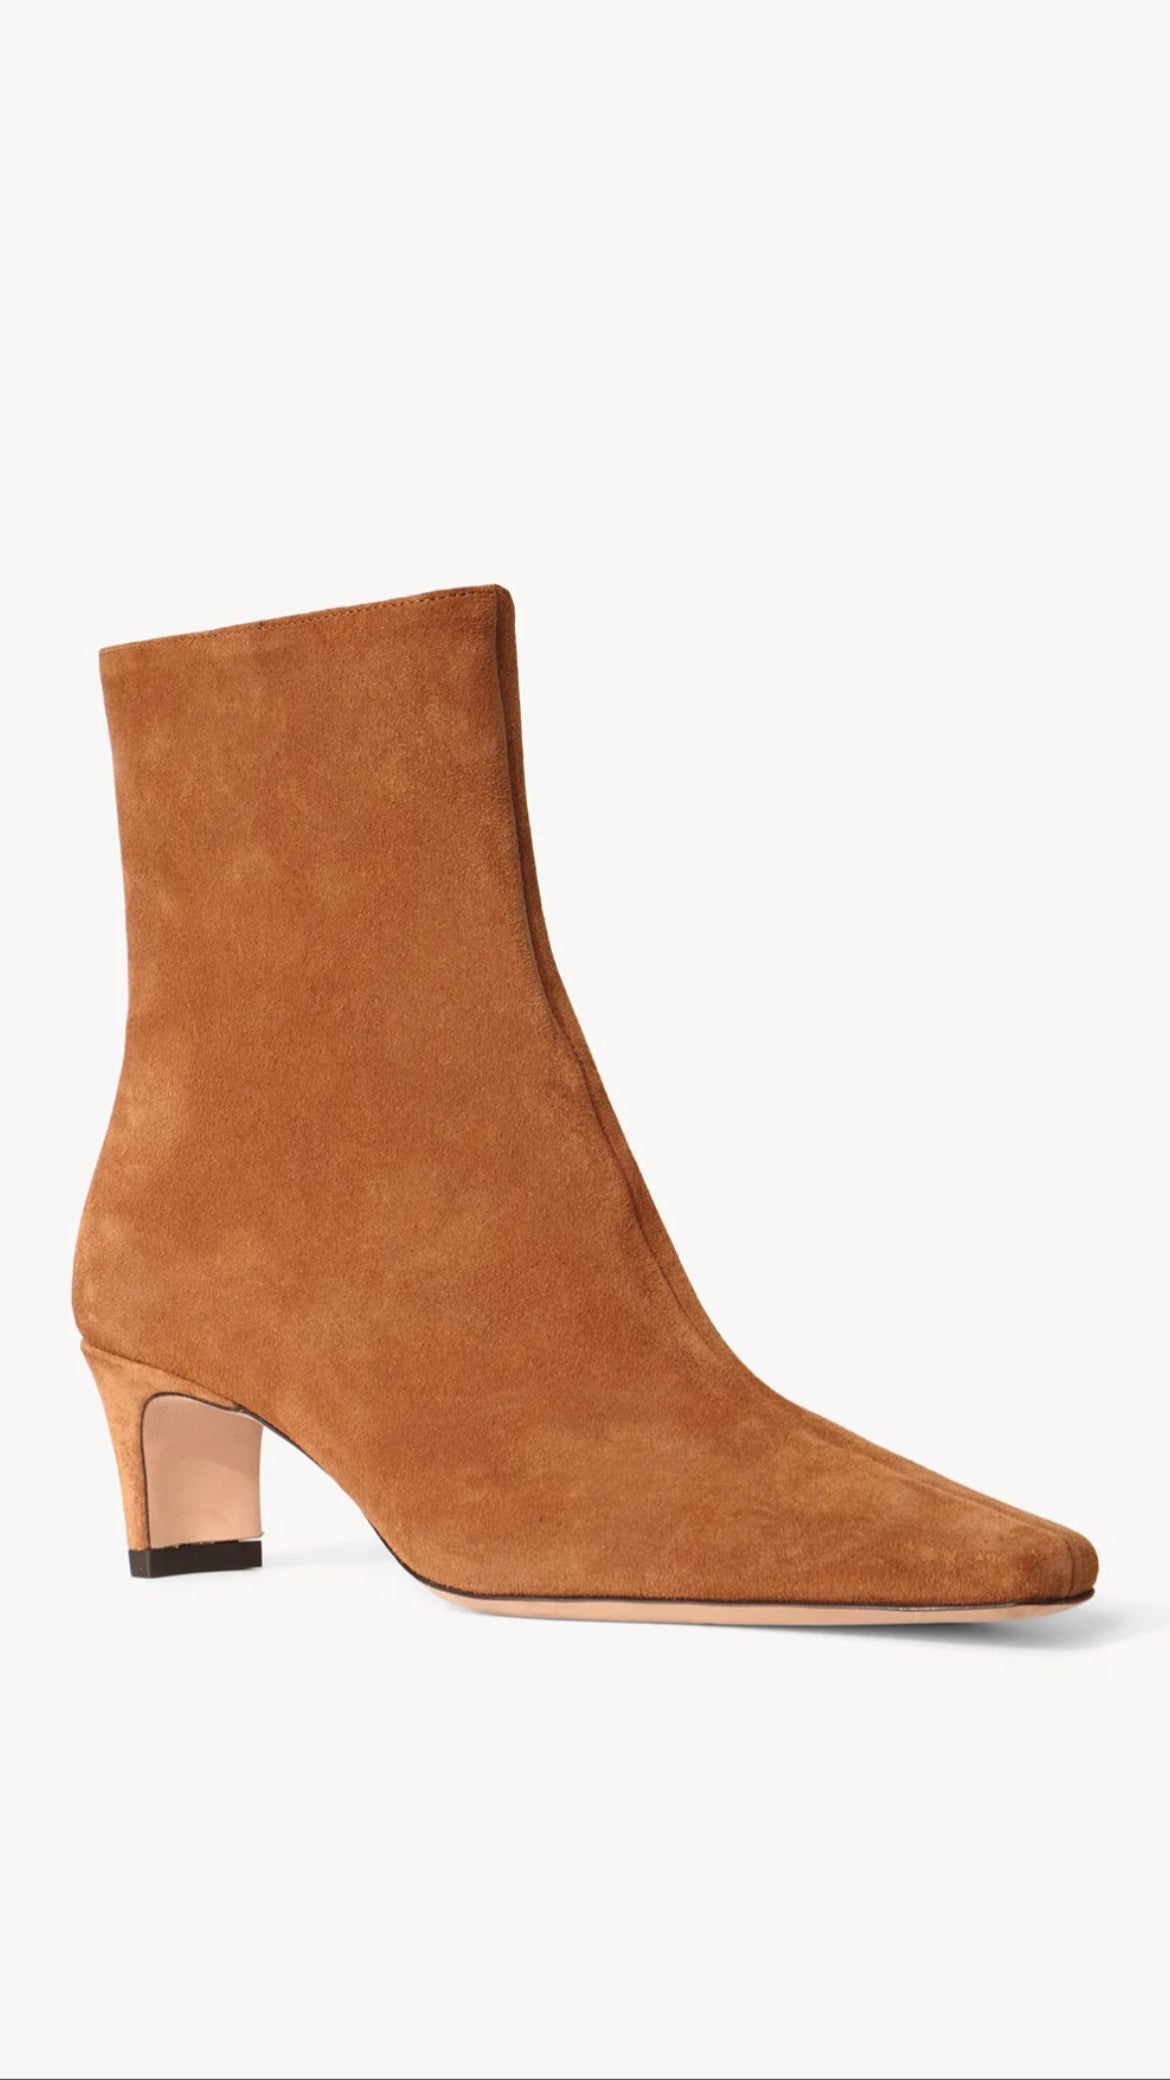 Staud- Wally Ankle Boot- Tan Suede